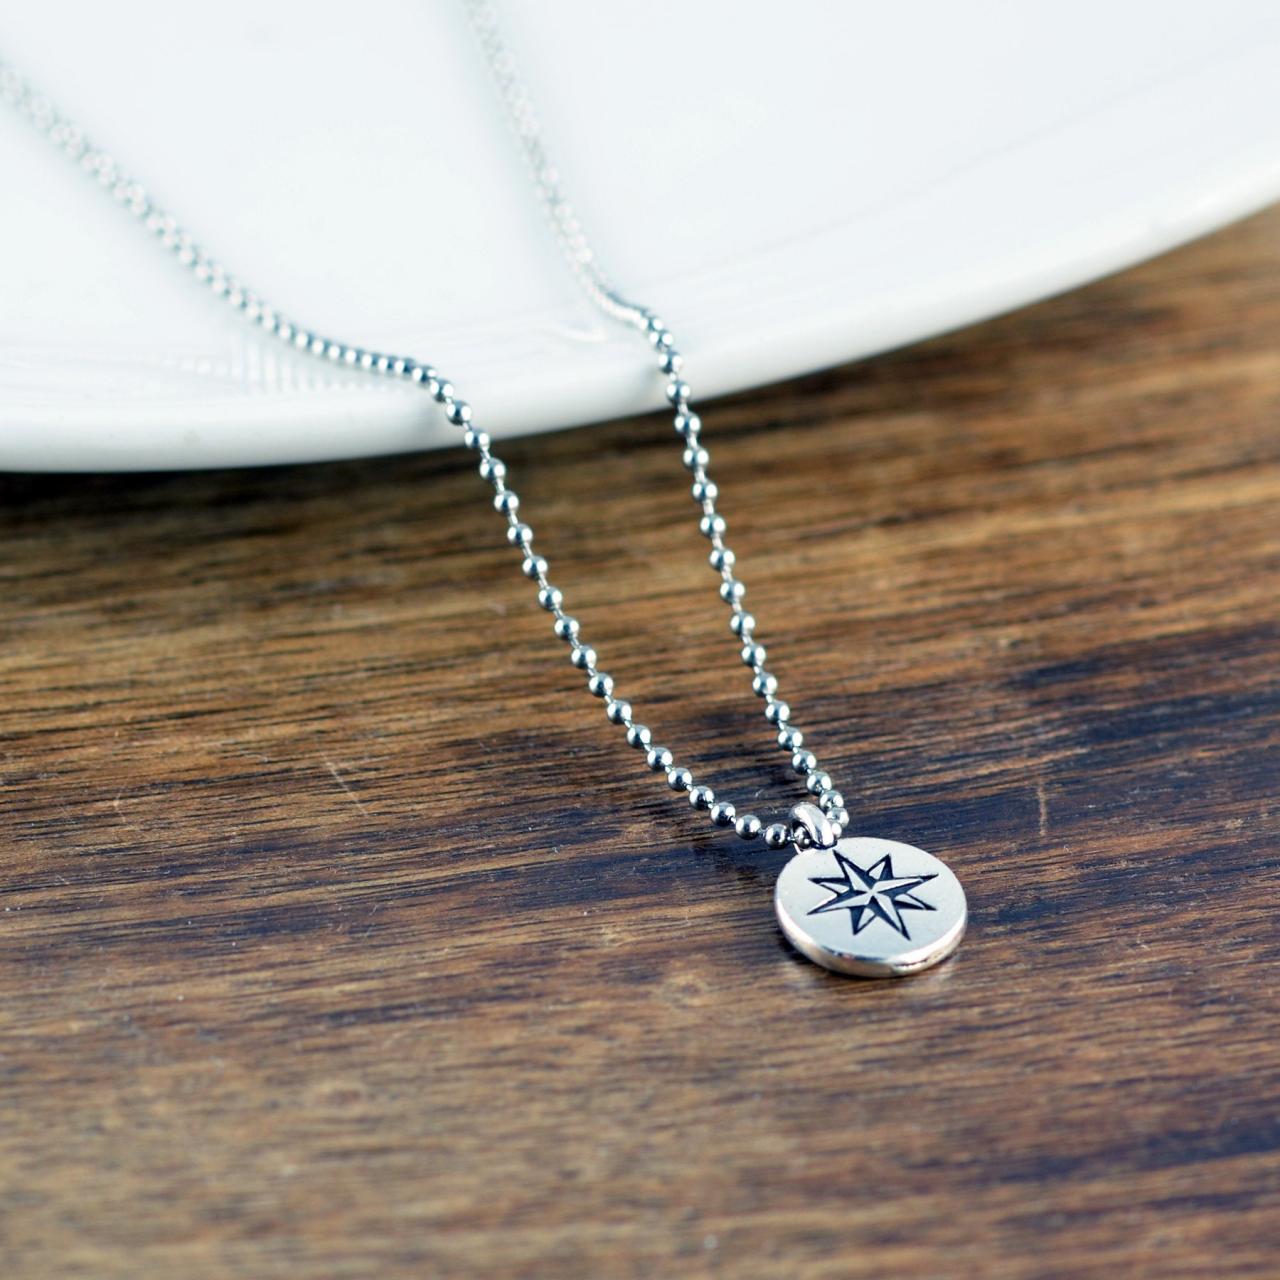 Necklace For Men, Men's Jewelry, Small Compass Necklace, Compass Pendant For Men, Compass Charm Necklace, Compass Necklace, Graduation